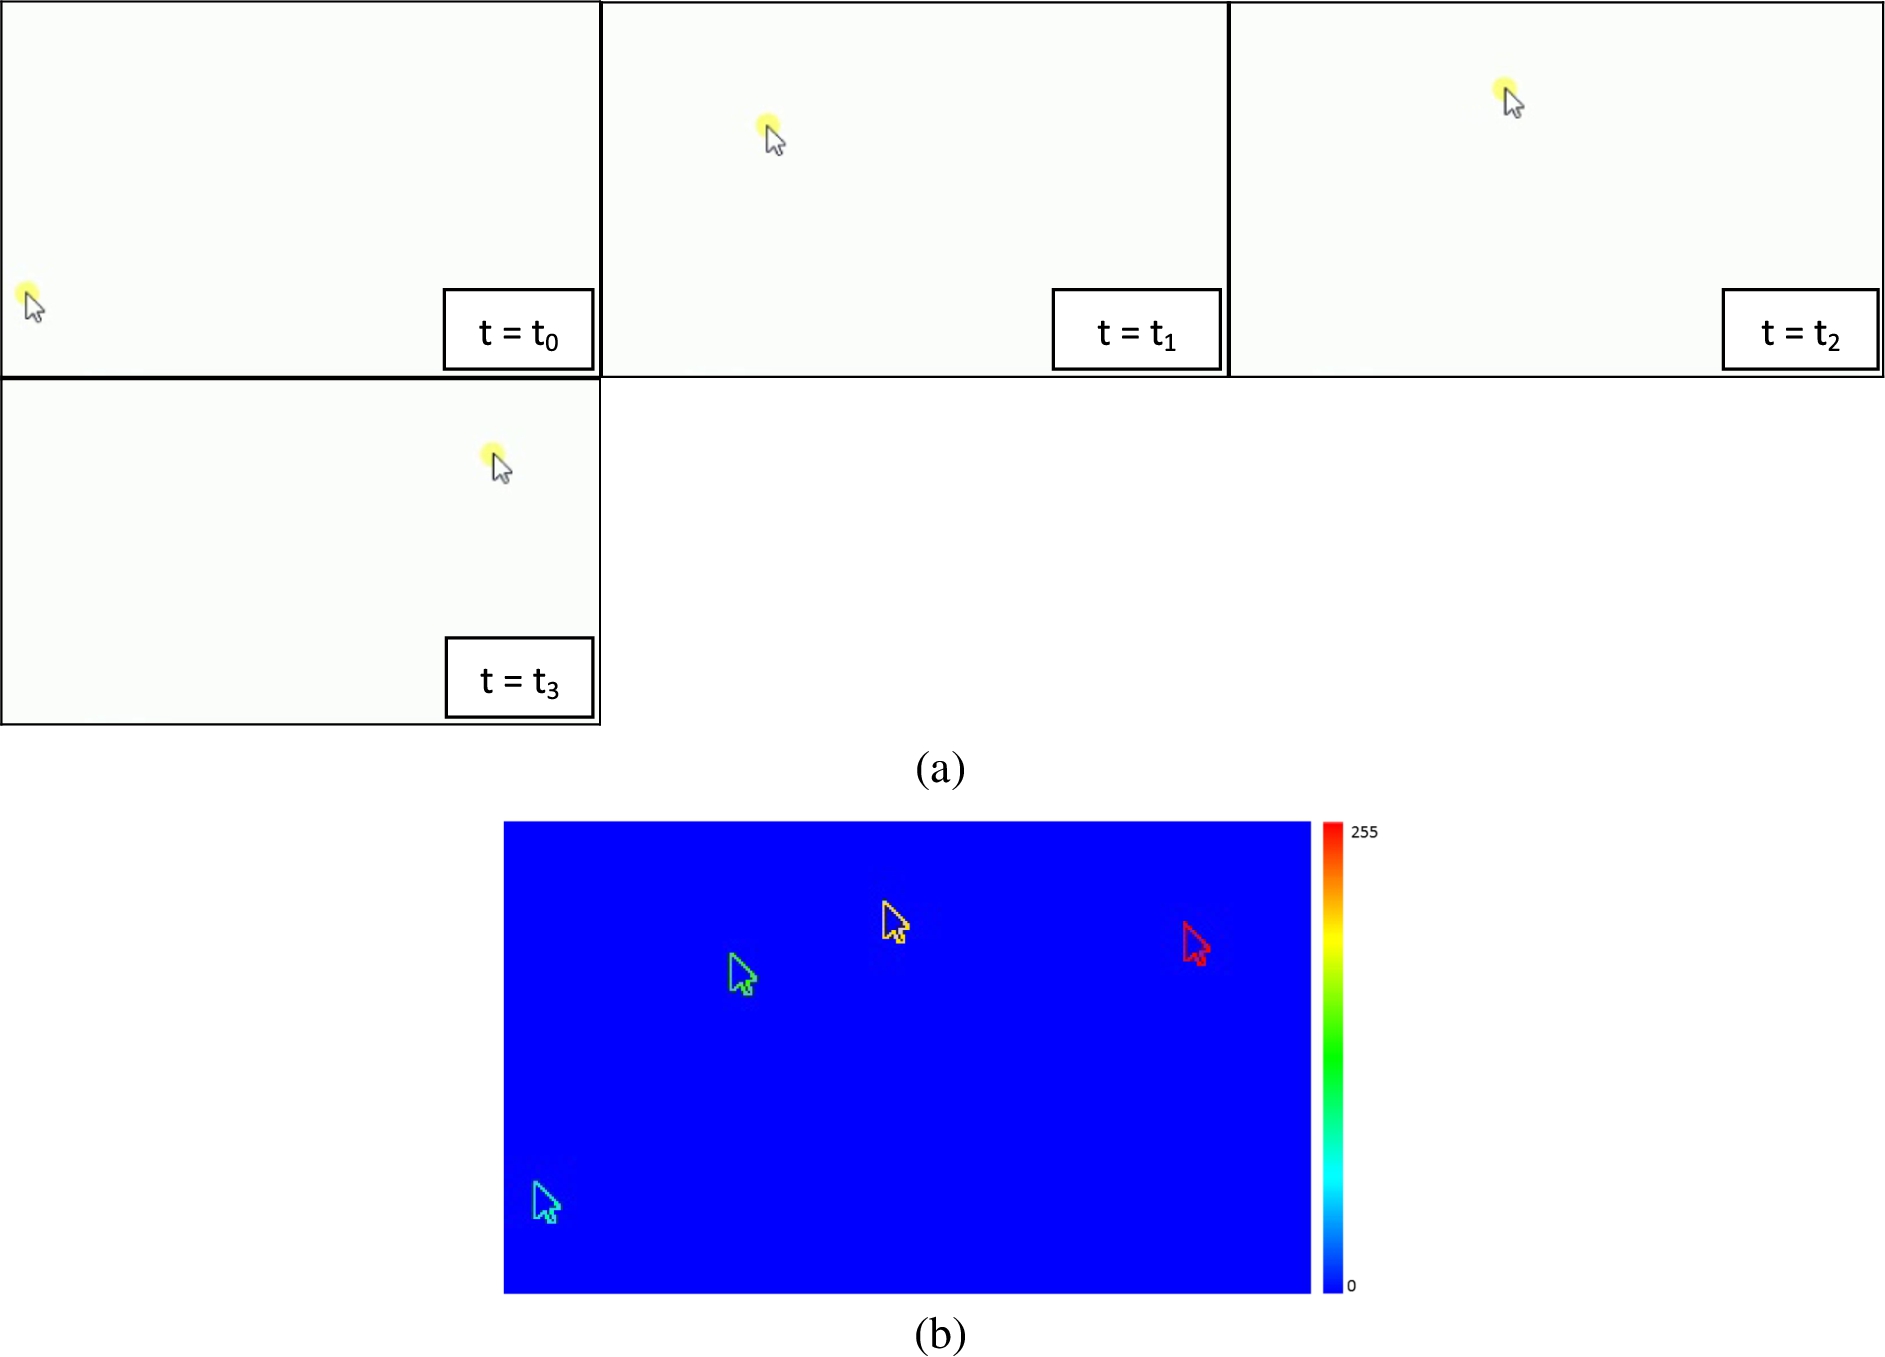 (a) Movement of cursor on a computer screen at different time points of event. (b) MHI image generated by computing threshold image of the difference of images shown in Fig. 1(a). The MHI clearly shows the movements of the cursor at different time points. As can be seen the most recent motion is highlighted by red color while the initial cursor position during its motion is represented by blue color.